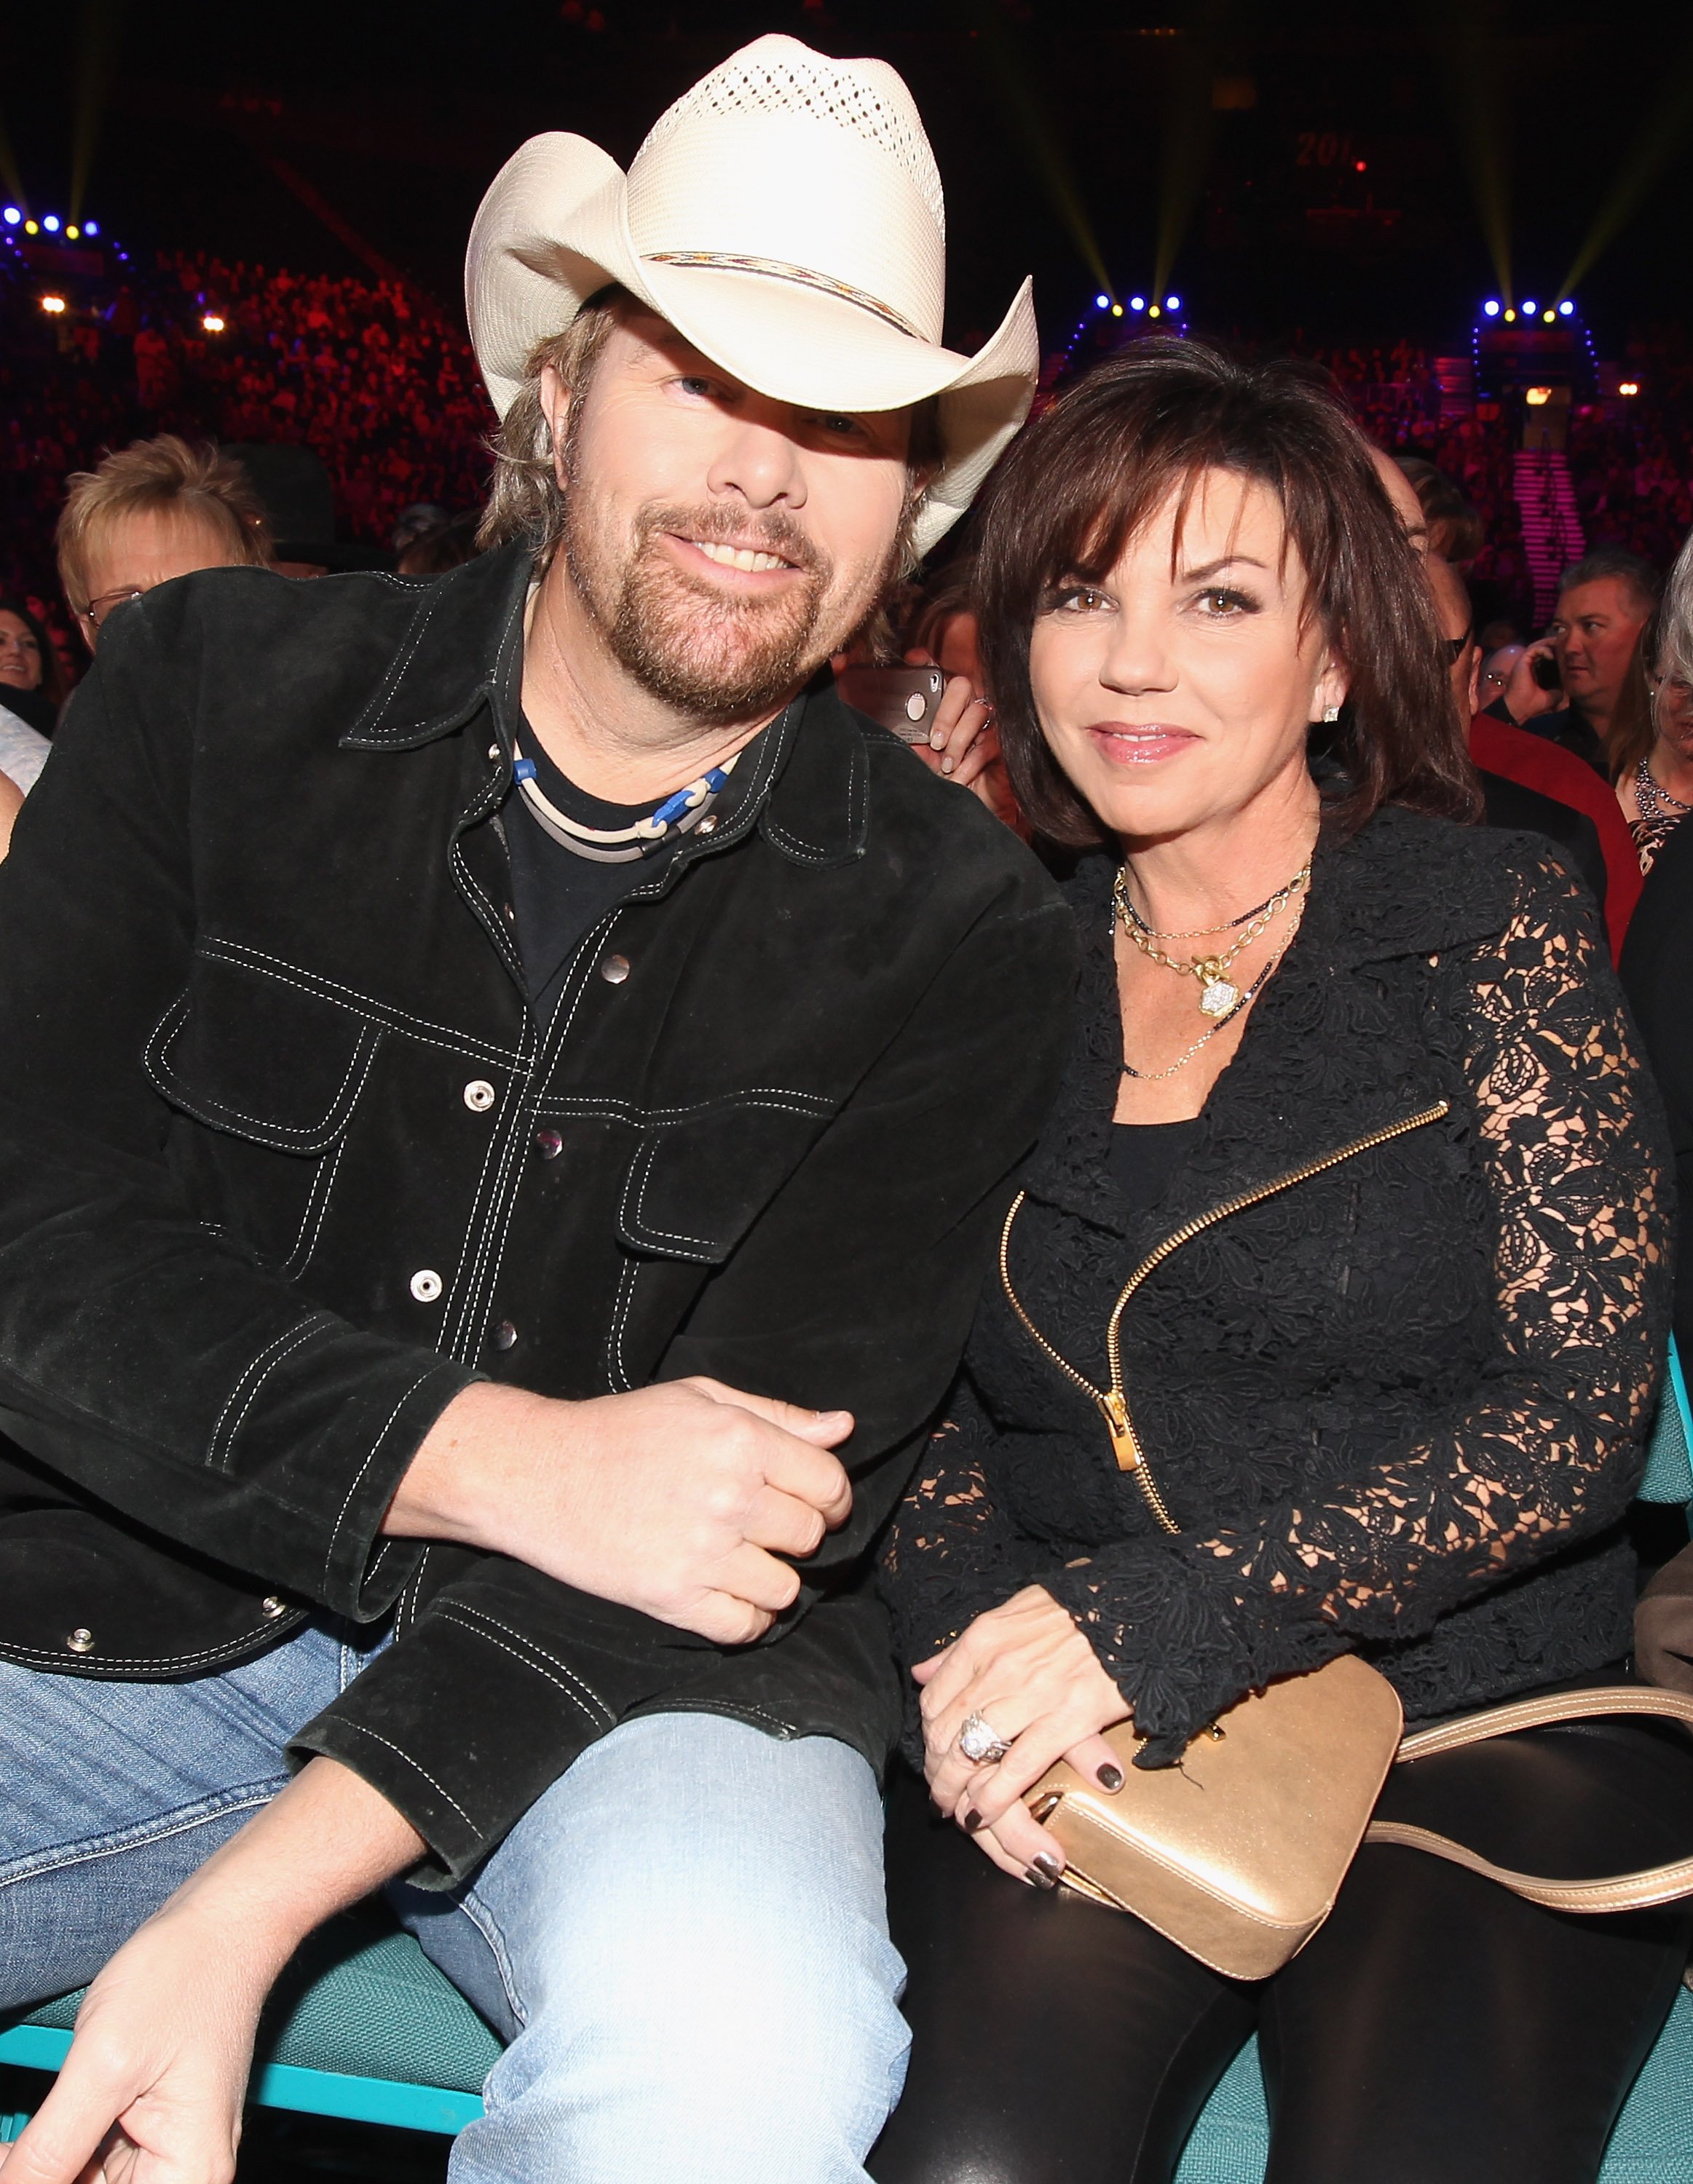 Musician Toby Keith and Tricia Lucus attend the American Country Awards 2011 at the MGM Grand Garden Arena on December 5, 2011 in Las Vegas, Nevada | Source: Getty Images